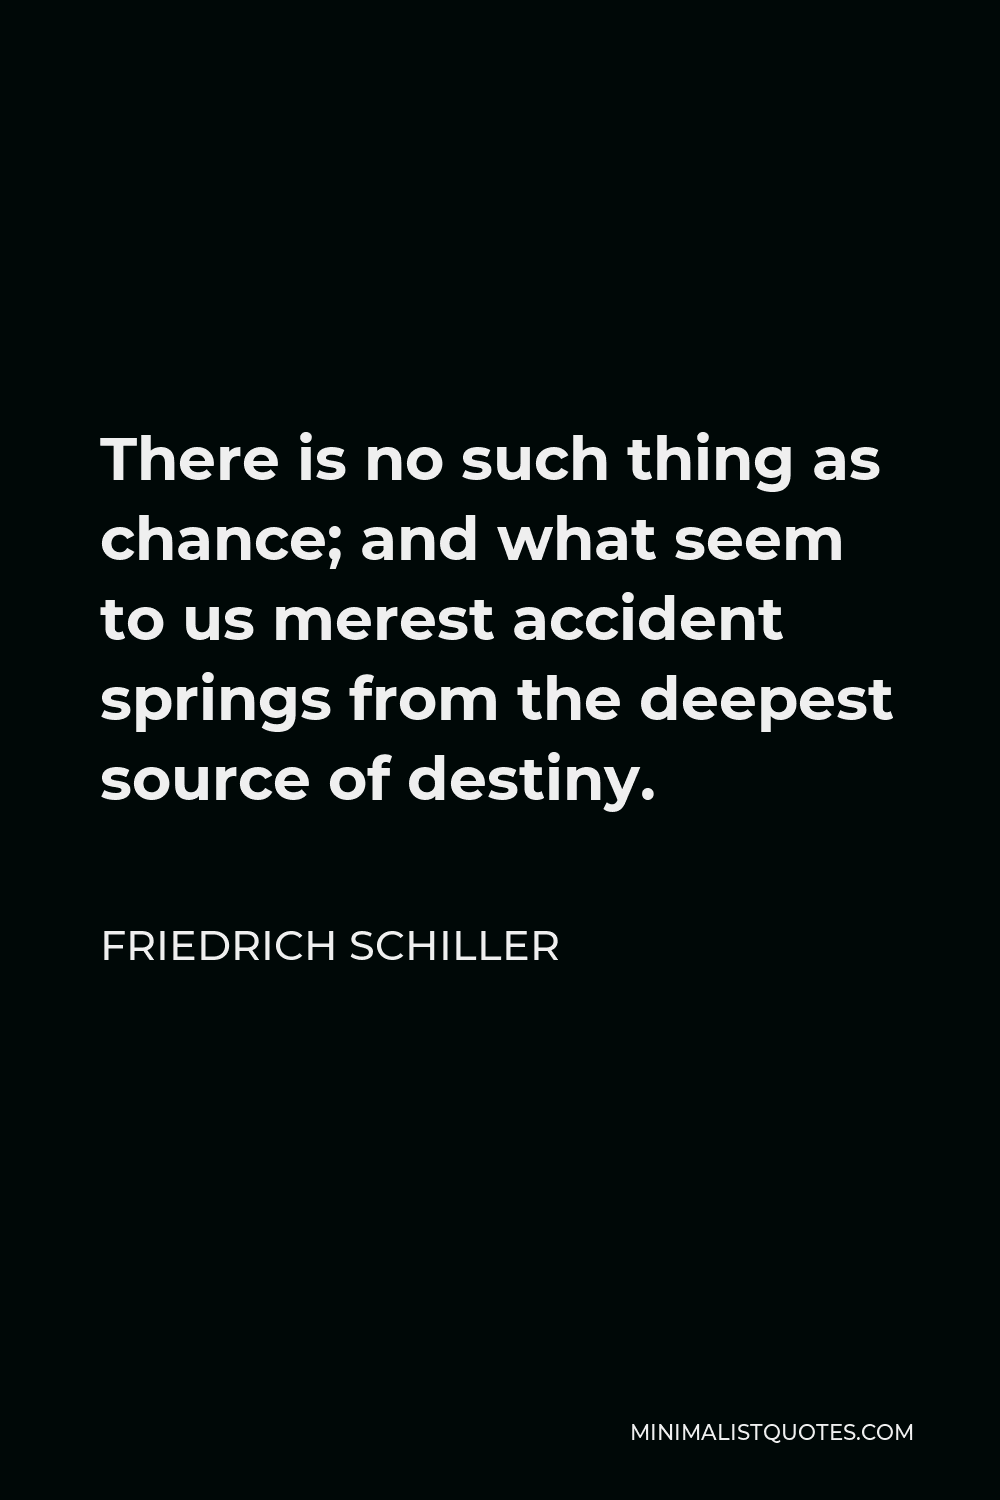 Friedrich Schiller Quote - There is no such thing as chance; and what seem to us merest accident springs from the deepest source of destiny.